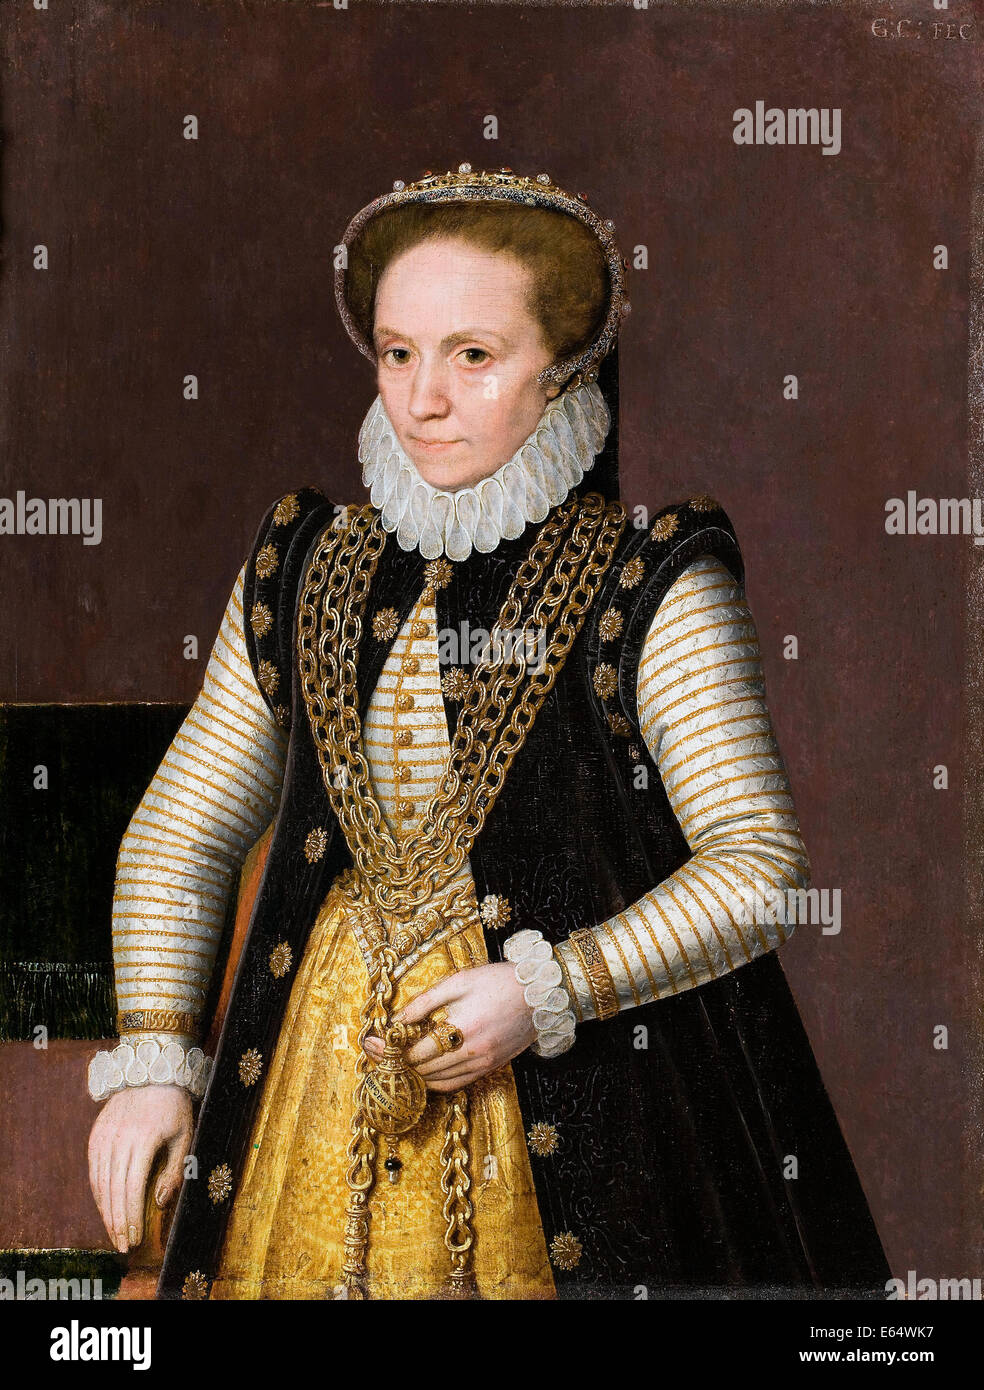 Monogrammist G.E.C., Portrait of an Unknown French Noblewoman 1560-1569 Oil on panel. Hallwyl Museum, Stockholm, Sweden. Stock Photo